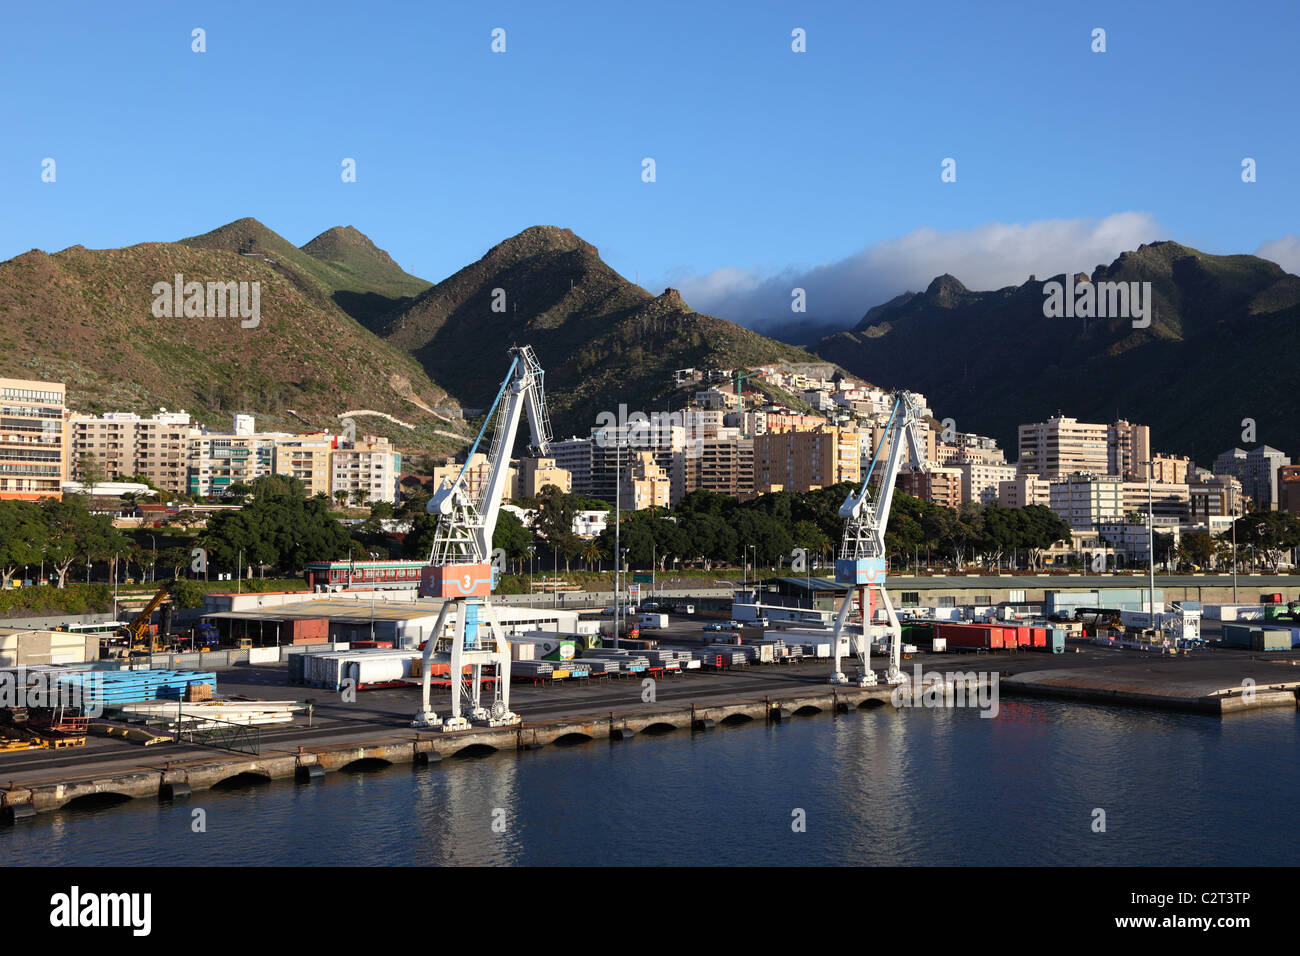 The port of Santa Cruz de Tenerife, Canary Islands Spain. Photo taken at 13th of March 2011 Stock Photo